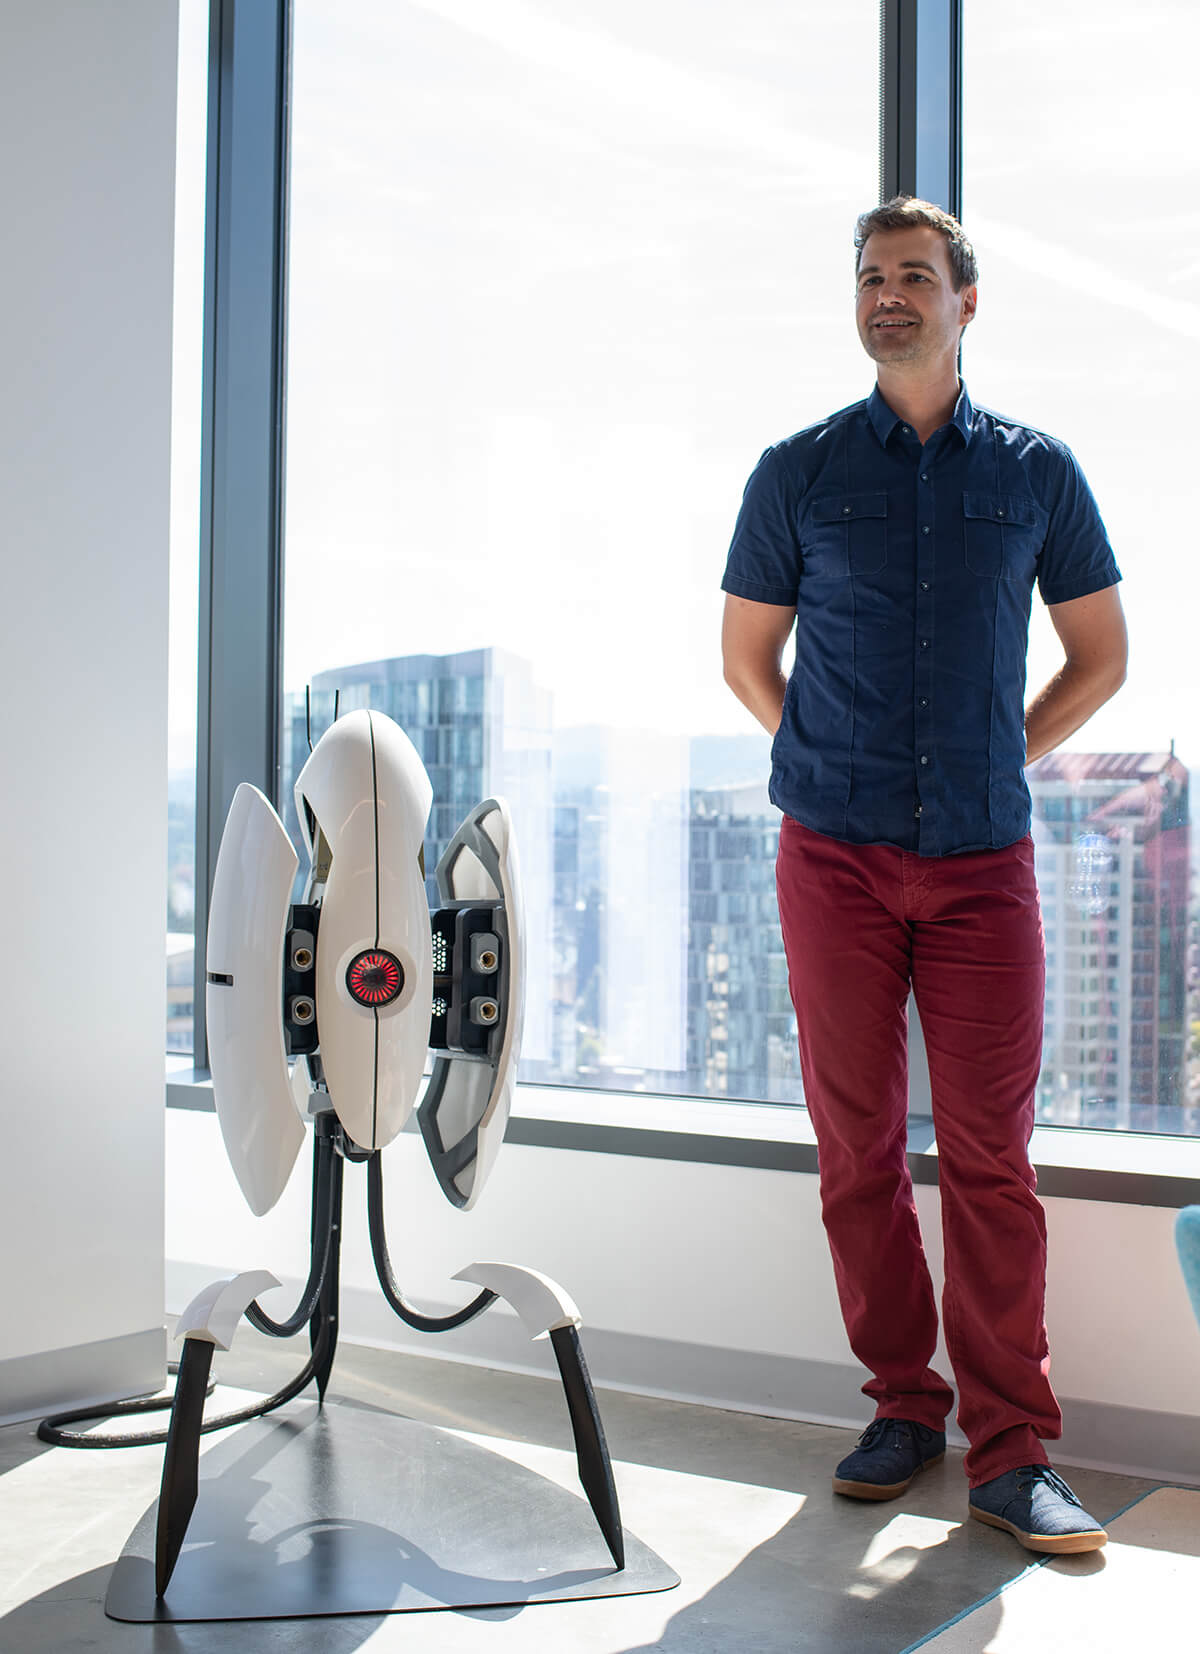 Kerry Davis stands by a replica sentry turret from Portal at the Valve headquarters.